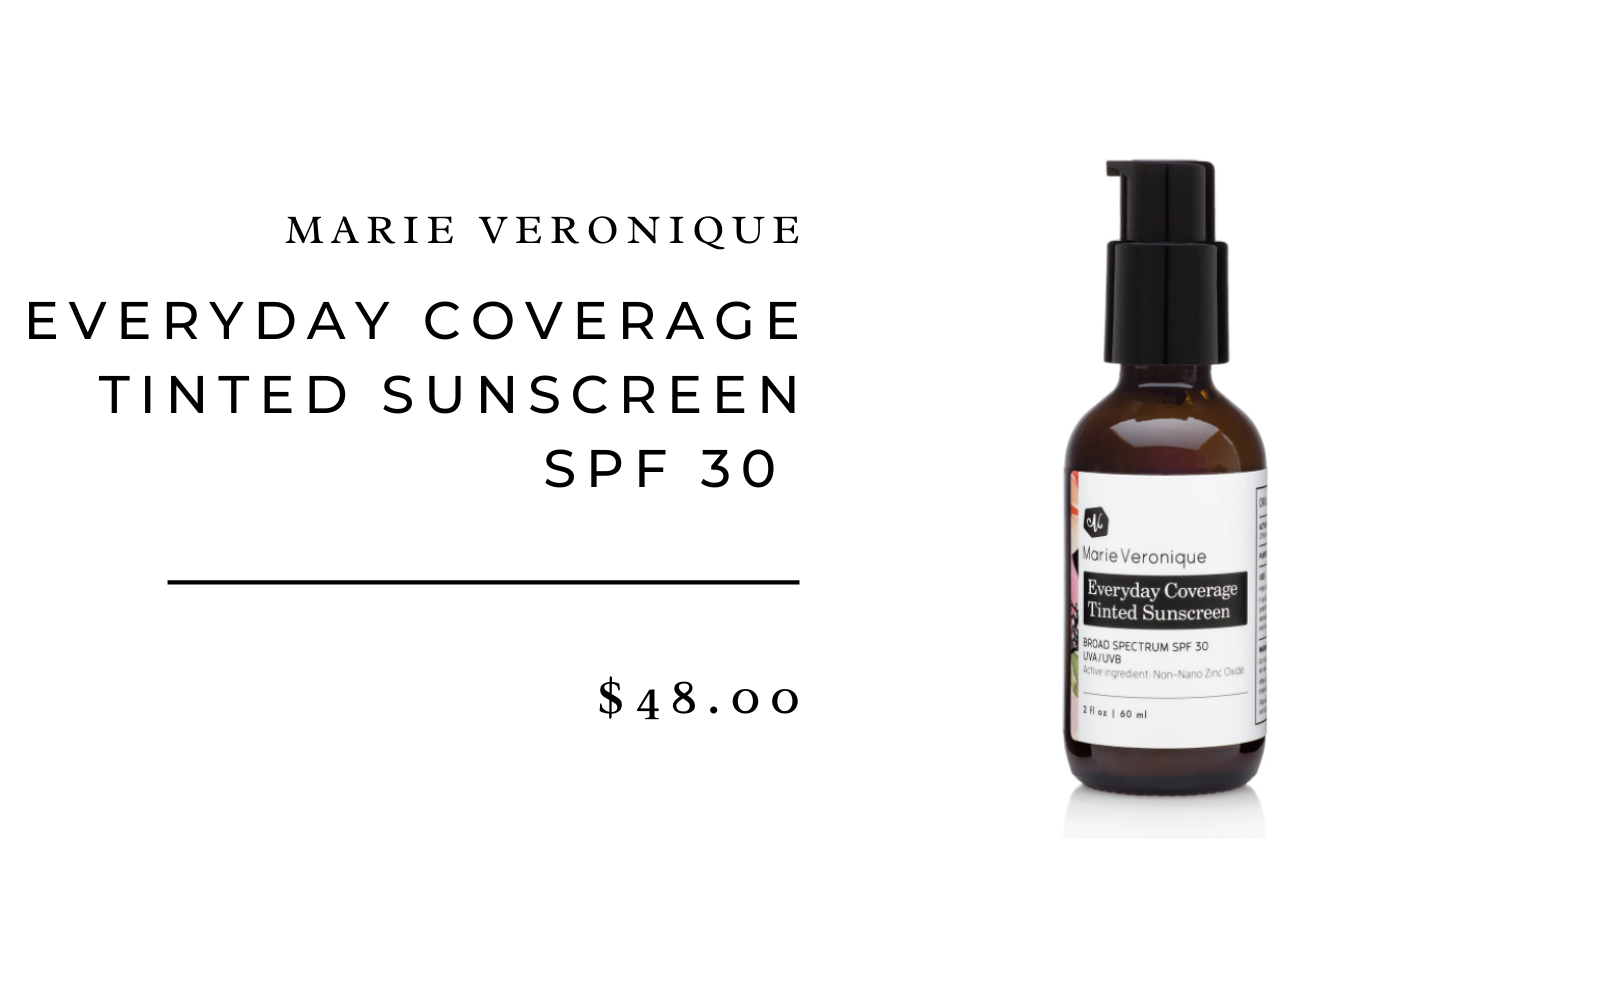 Marie Veronique Everyday Coverage Tinted Sunscreen SPF 30 